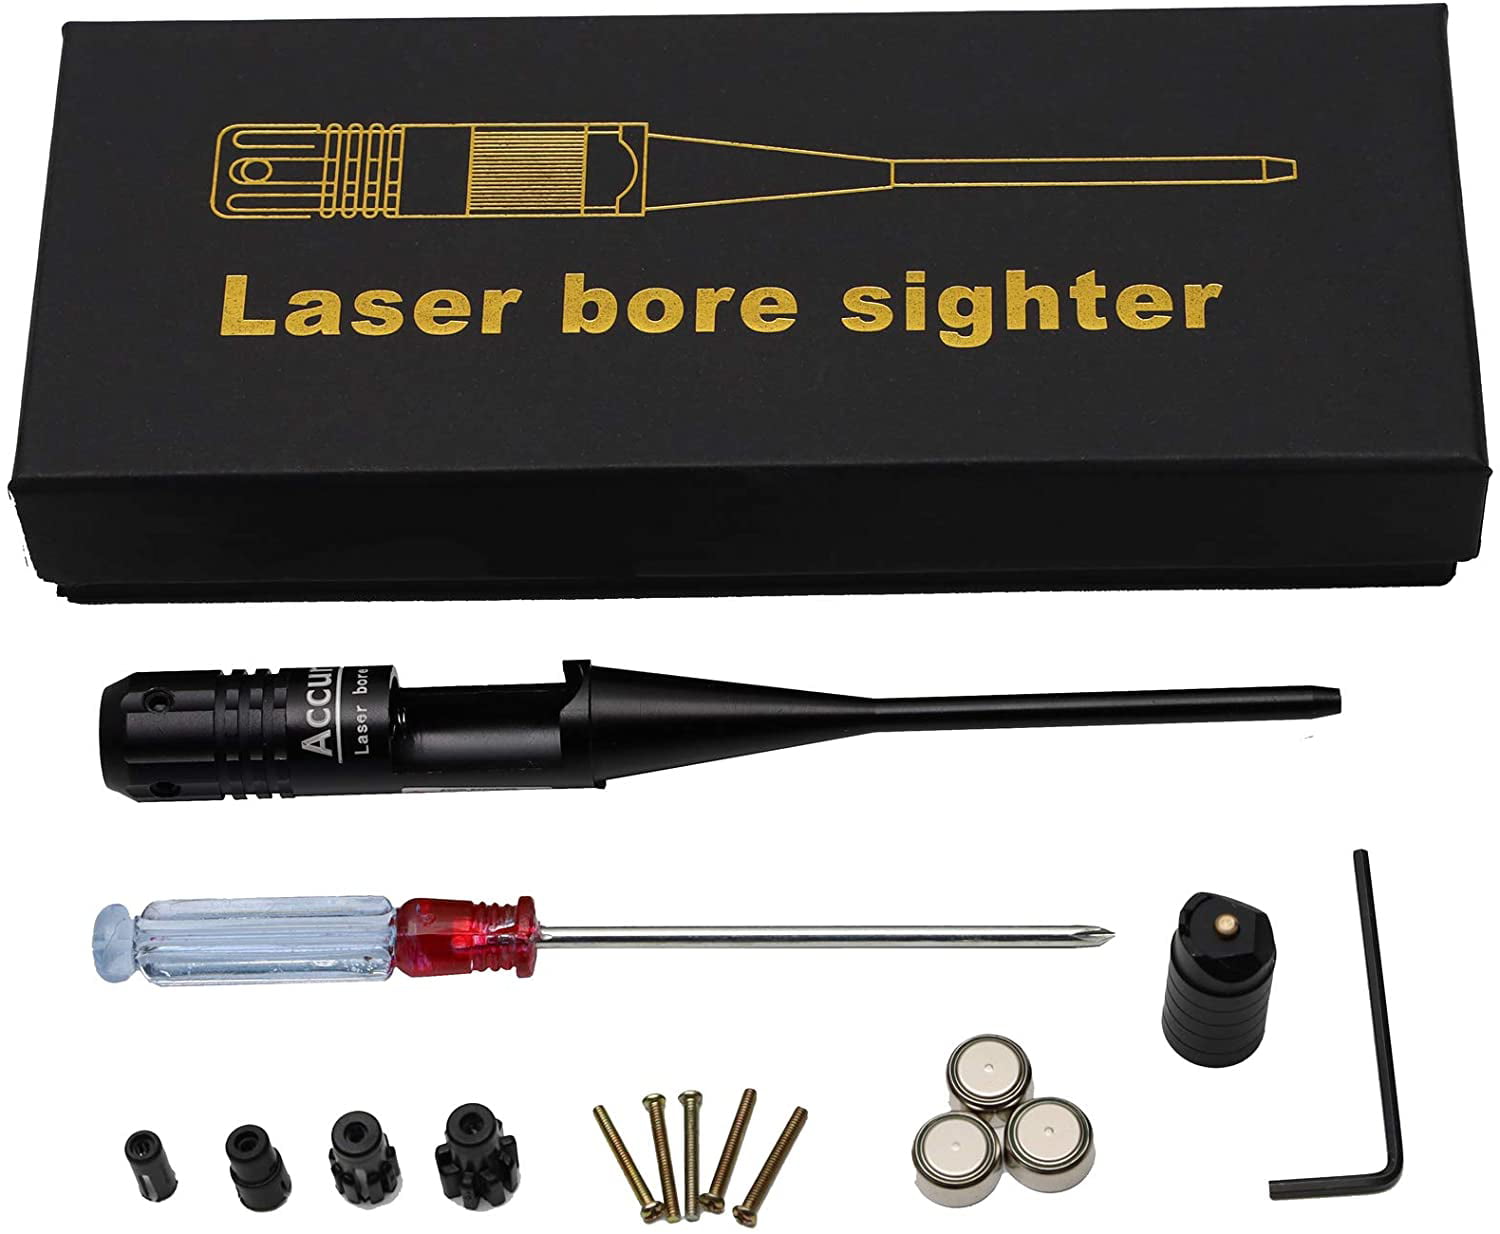 Red Laser Bore Sight Tool BoreSighter Fr Crossbow Archery Bow Arrows New Arrival 